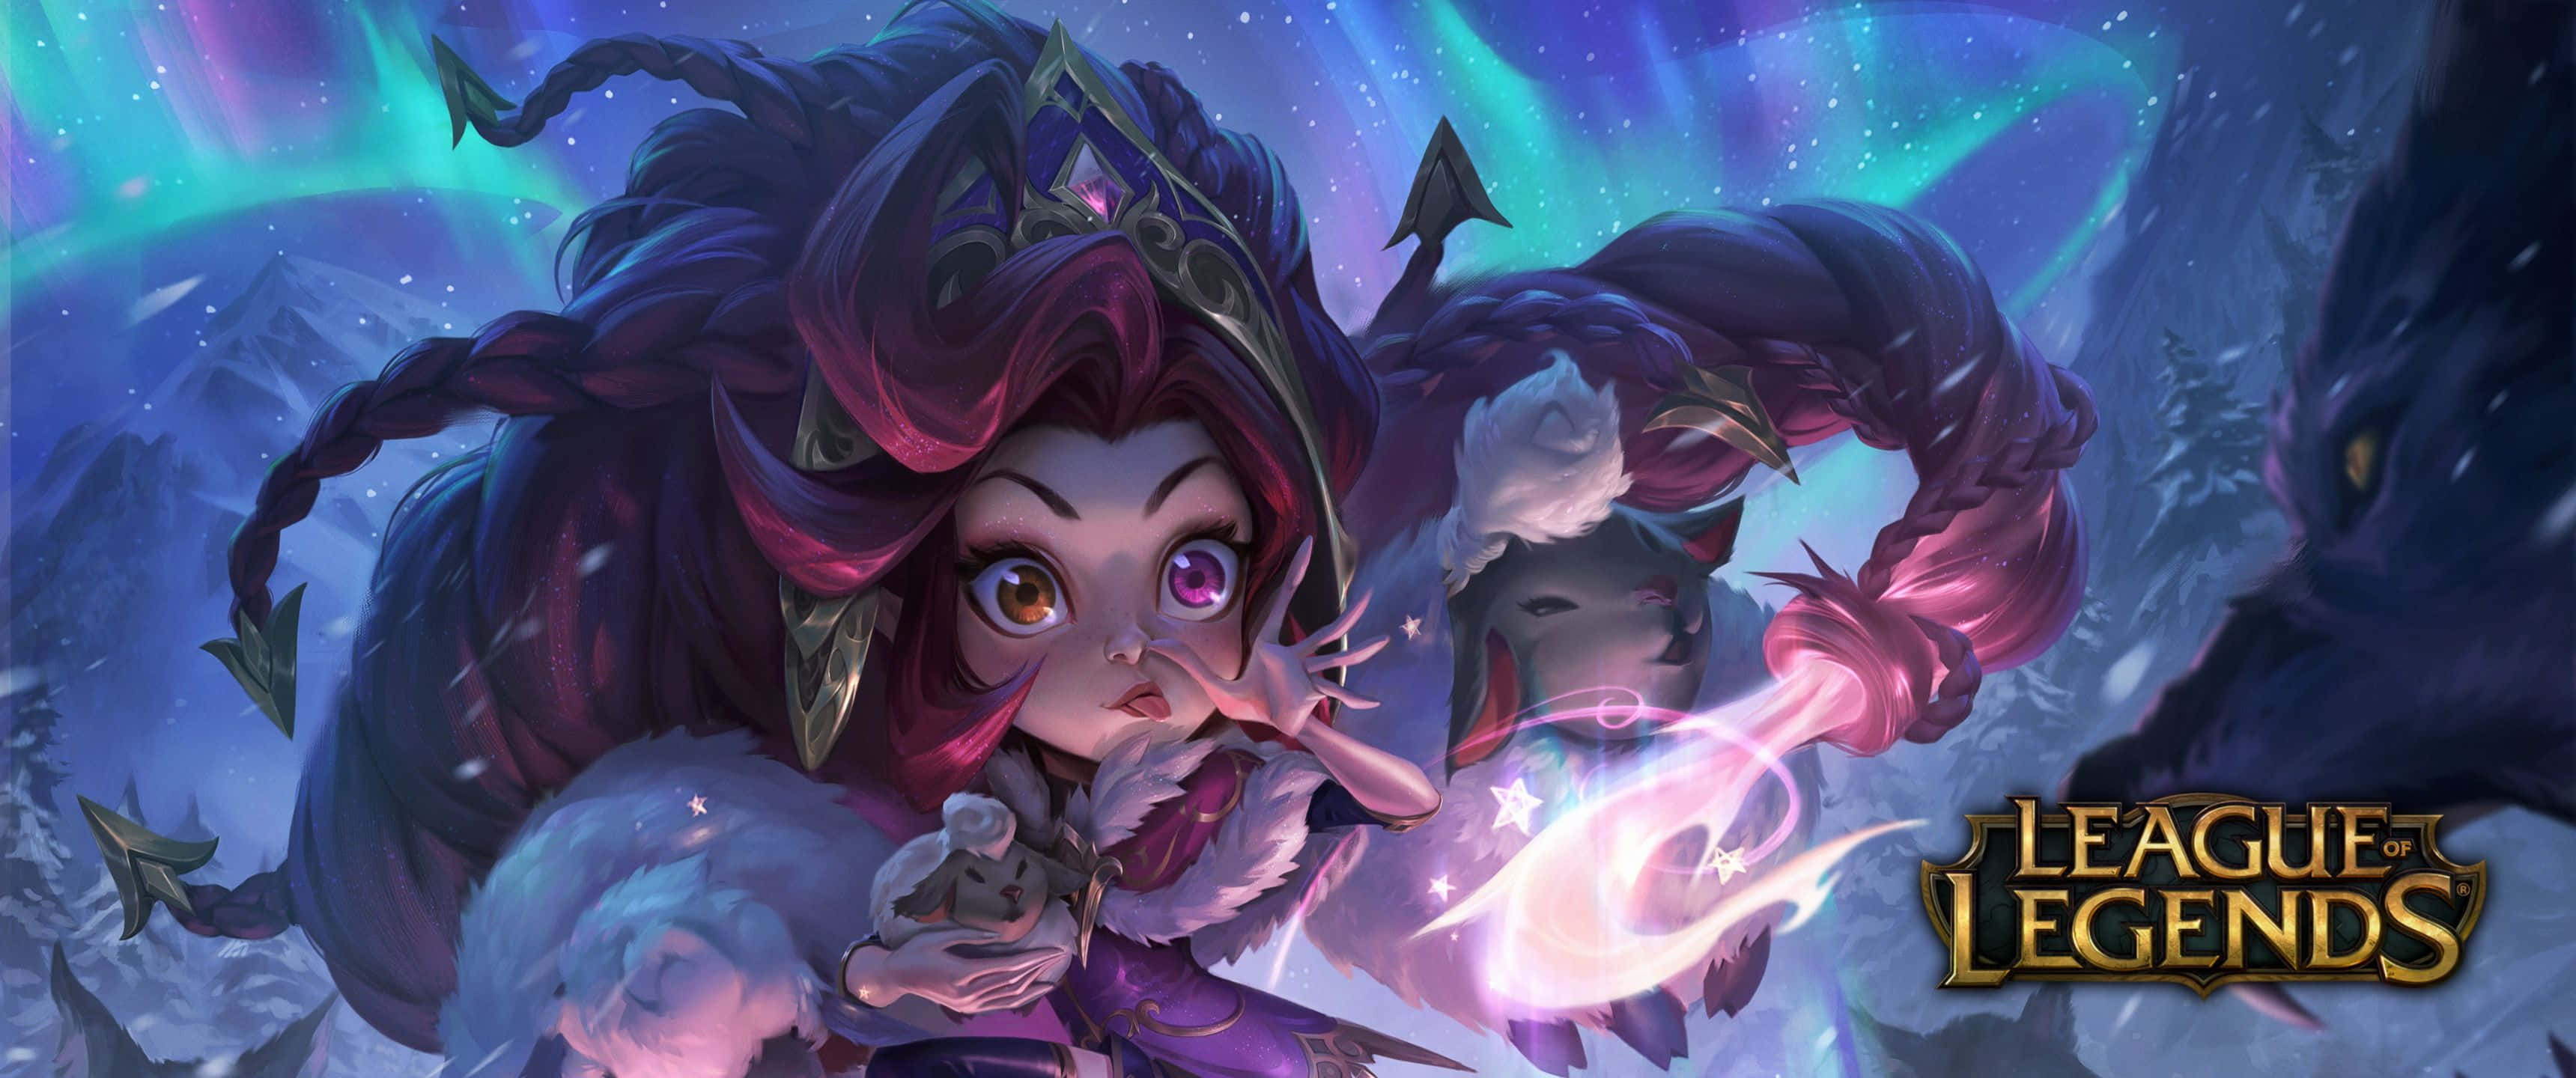 Winterblessed Zoe 3440x1440p League Of Legends Background